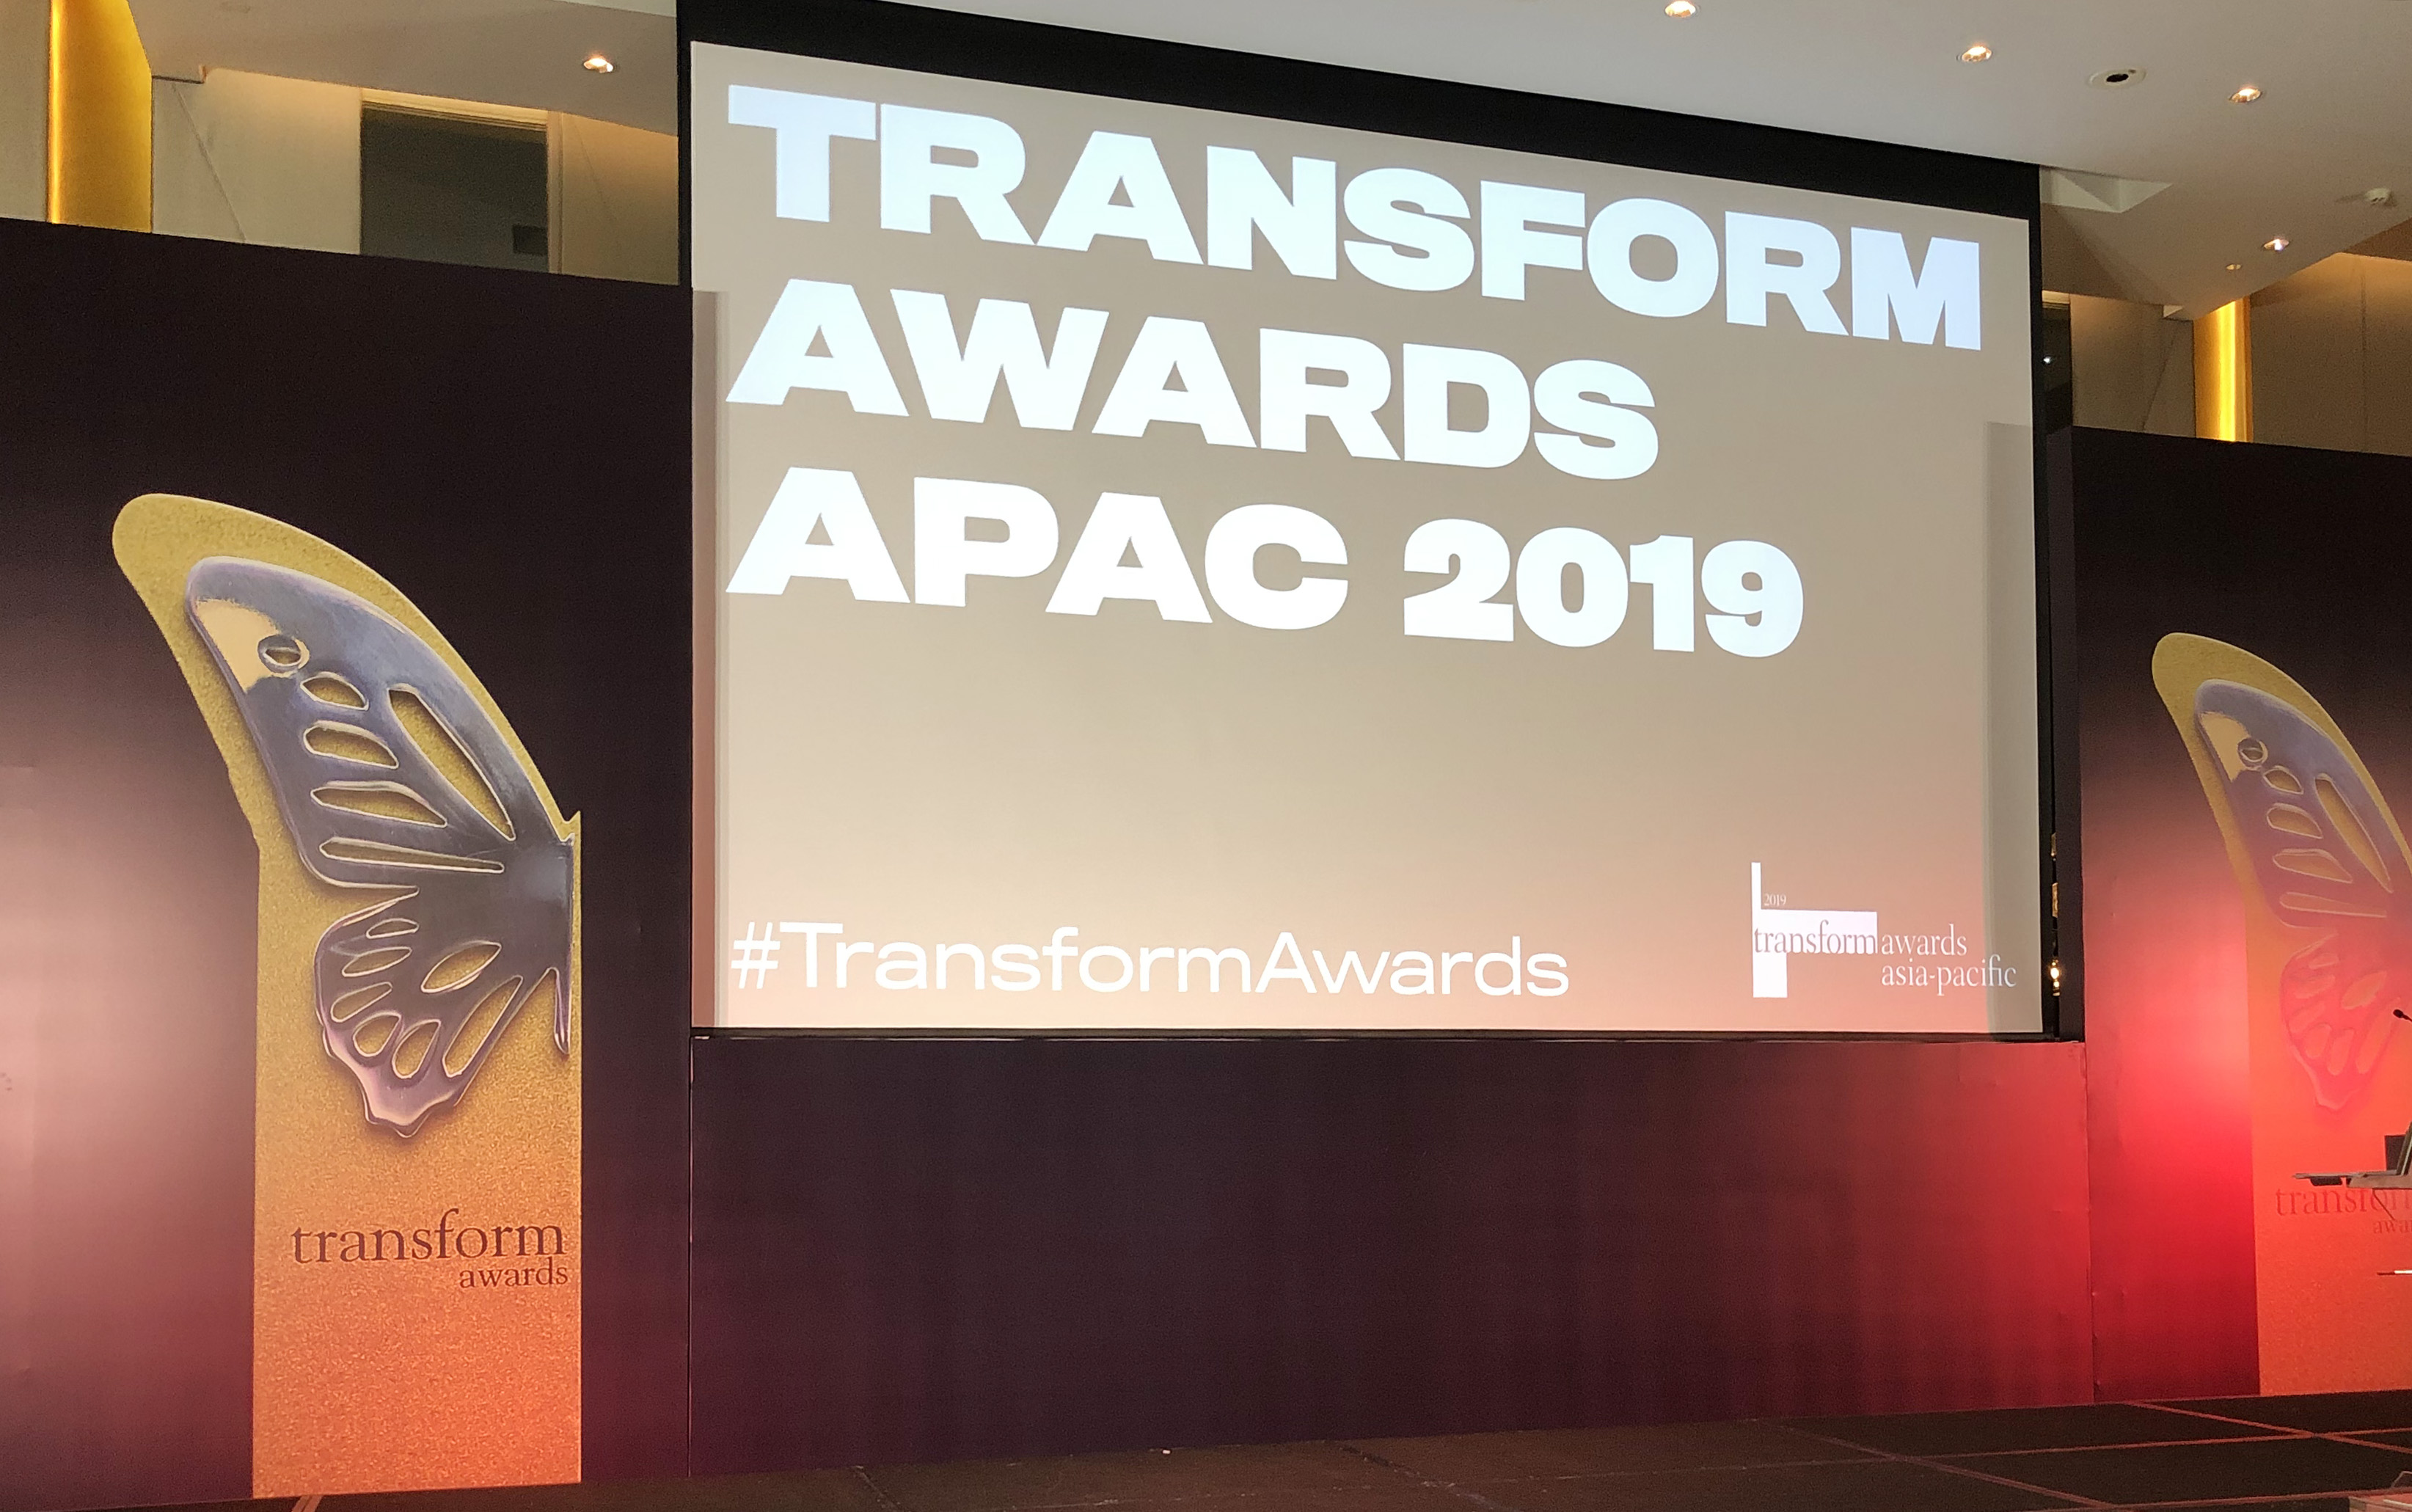 c&d inc.'s lift service brand wins two awards at the transform awards 2019